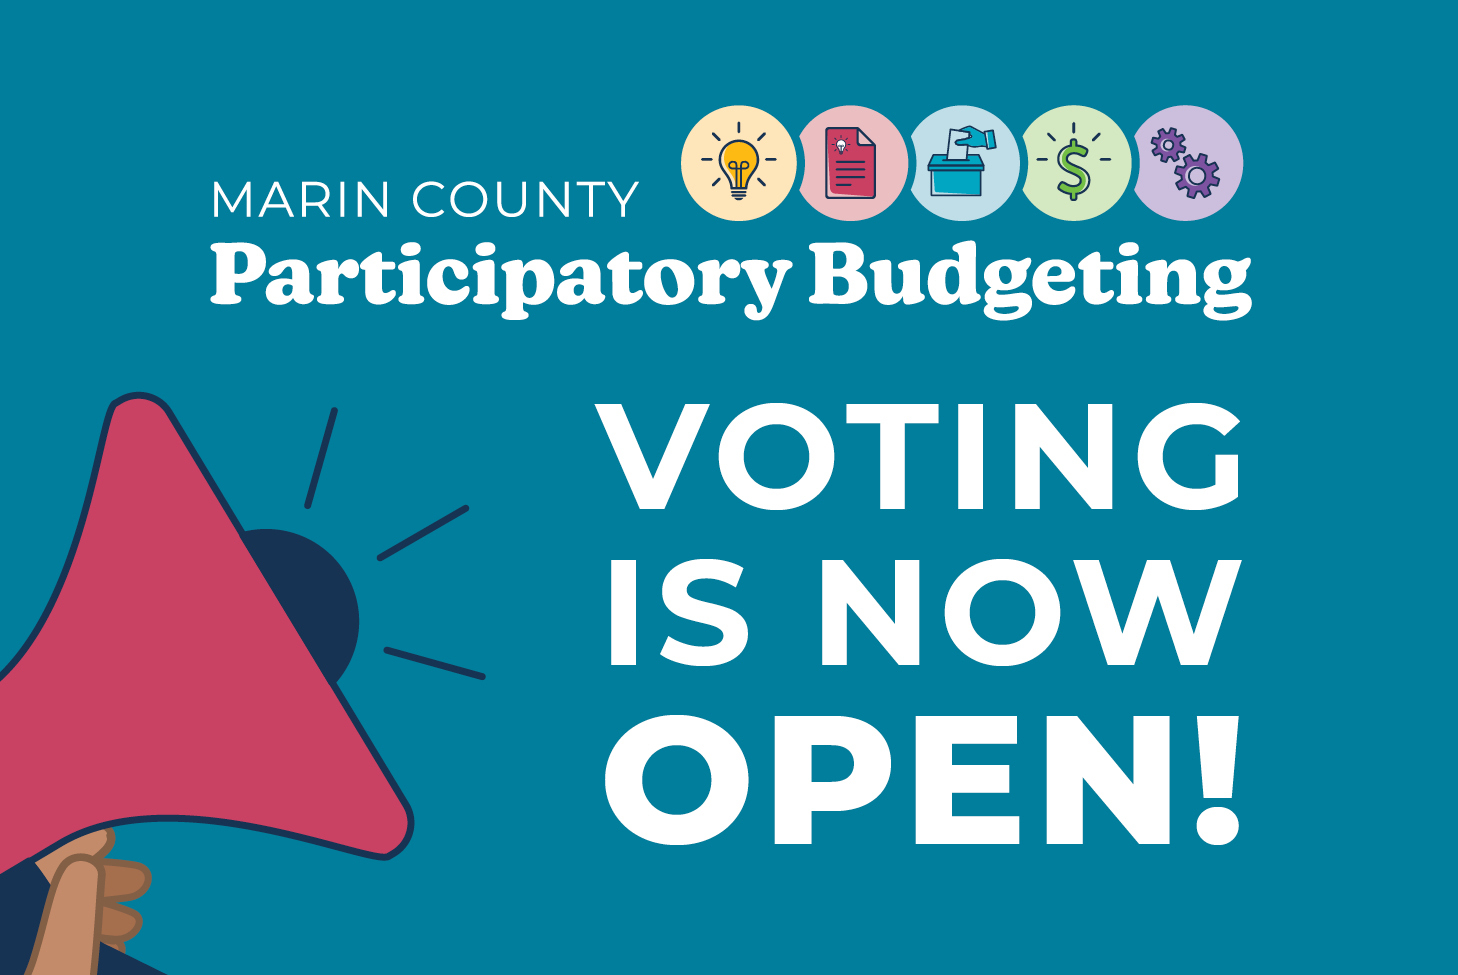 Participatory Budgeting - Voting is Now Open!